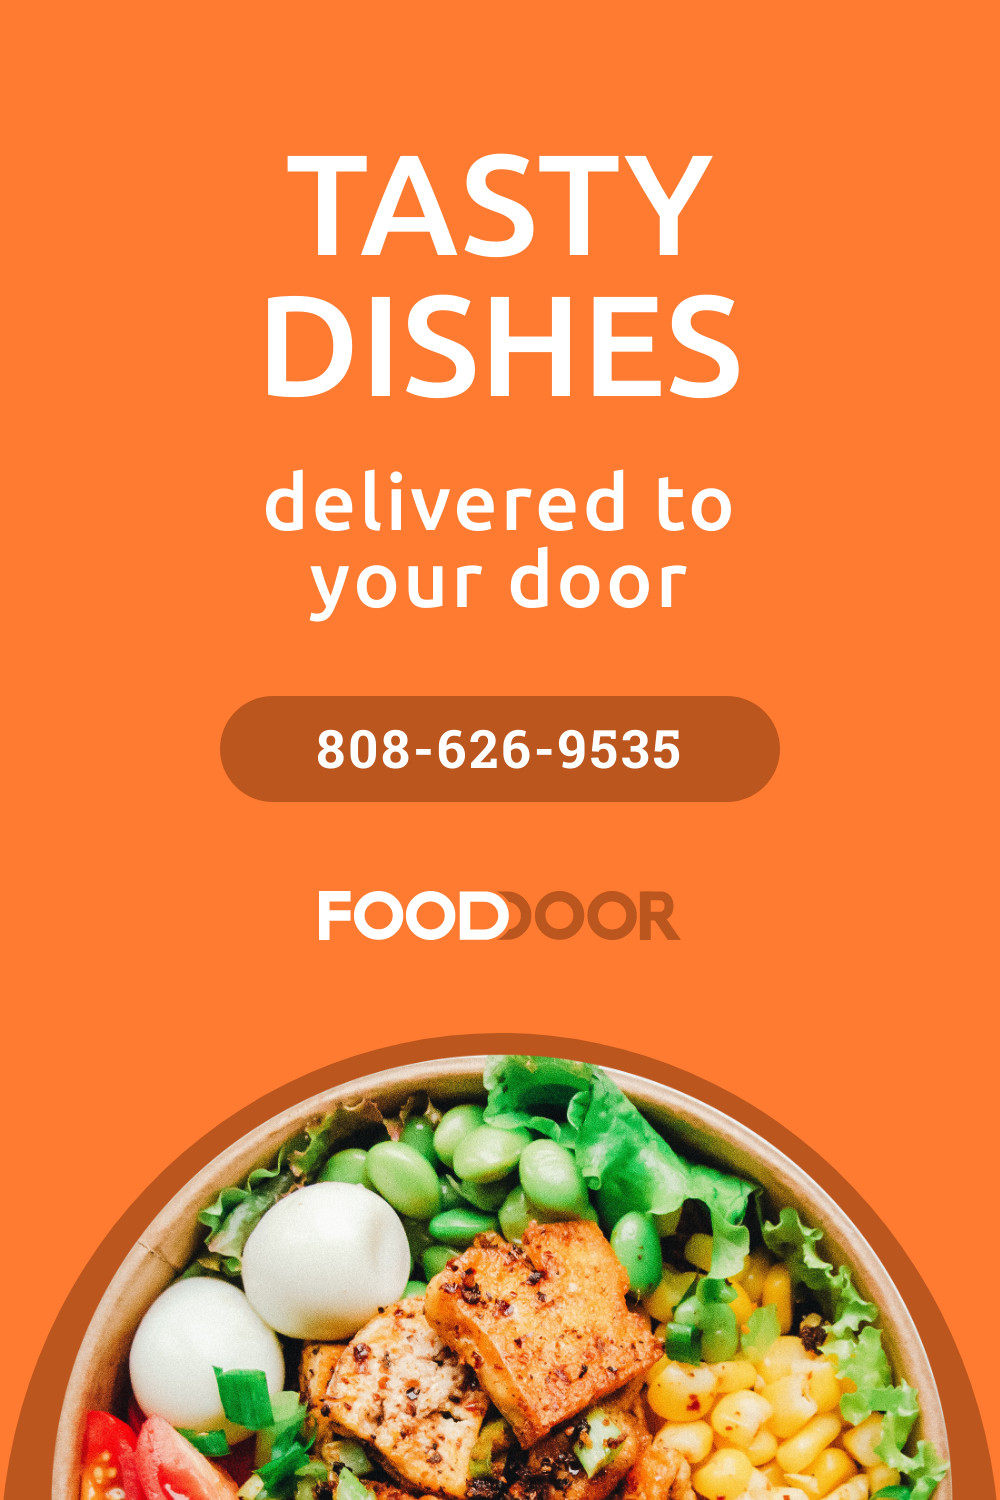 Tasty Dishes Delivered to your Door